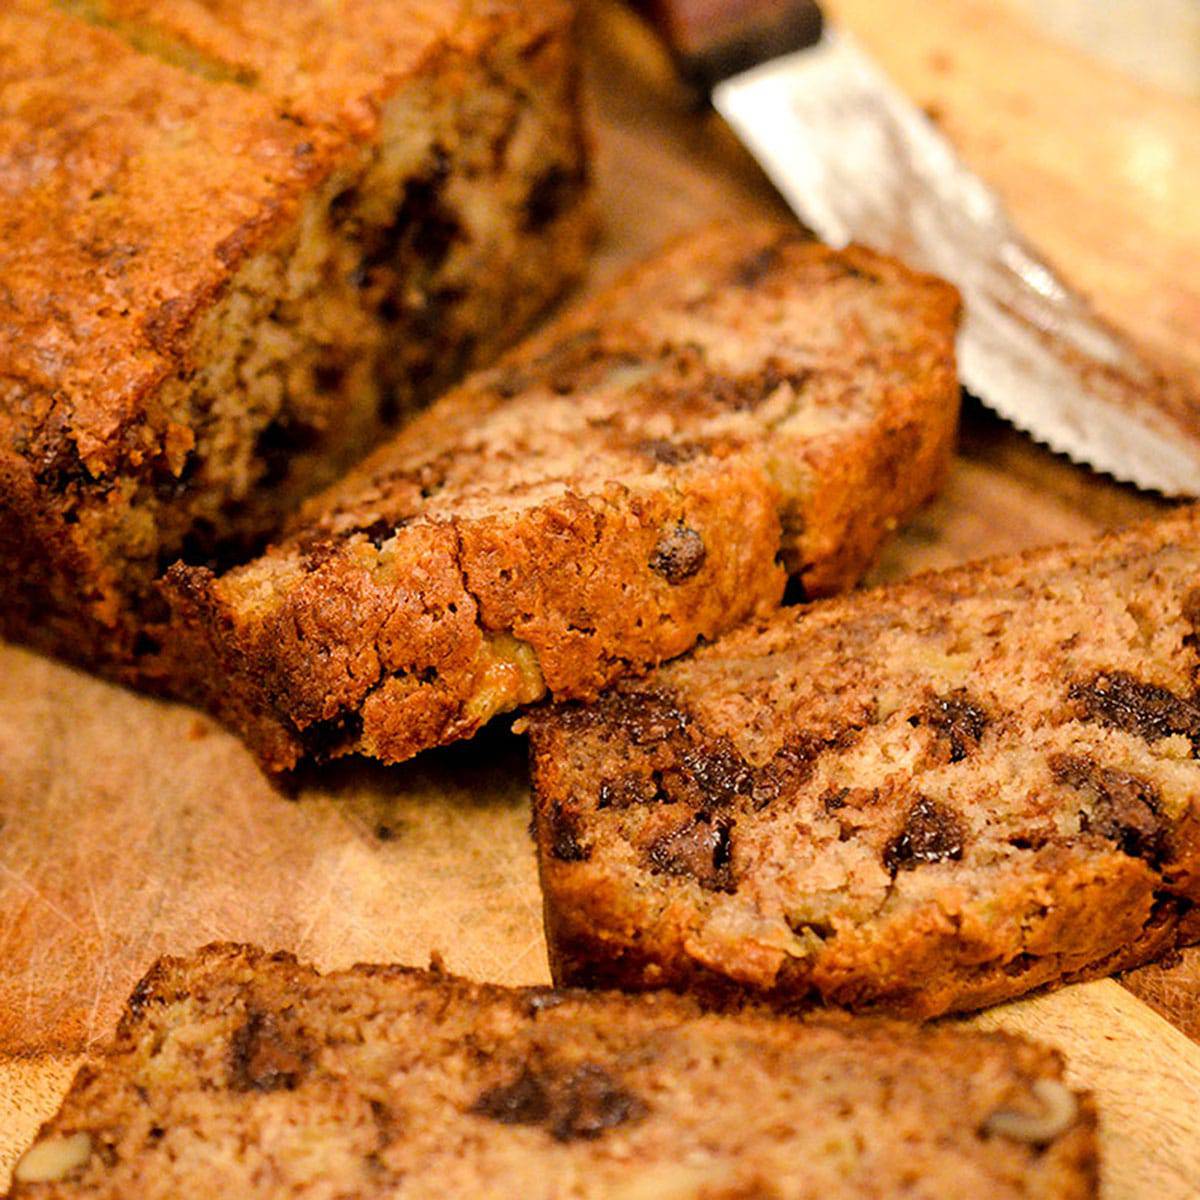 Slices of banana bread on a cutting baord.